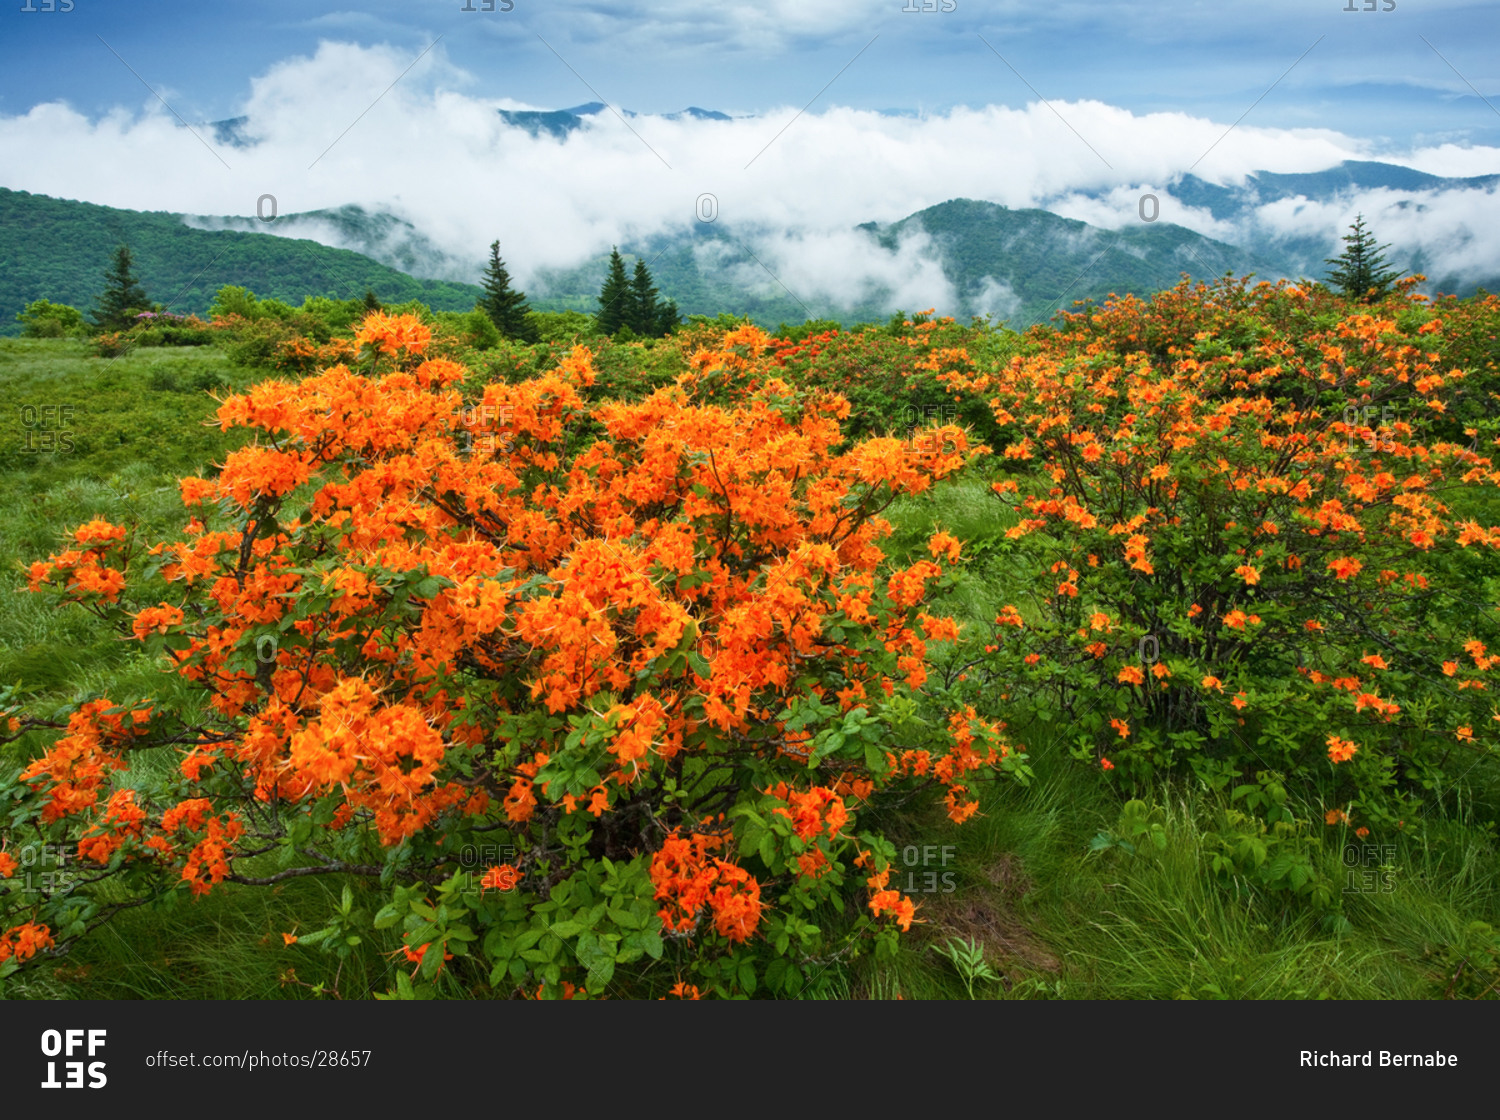 Flame Azaleas on Round Bald after thunderstorm in Roan Highlands, North Carolina and Tennessee